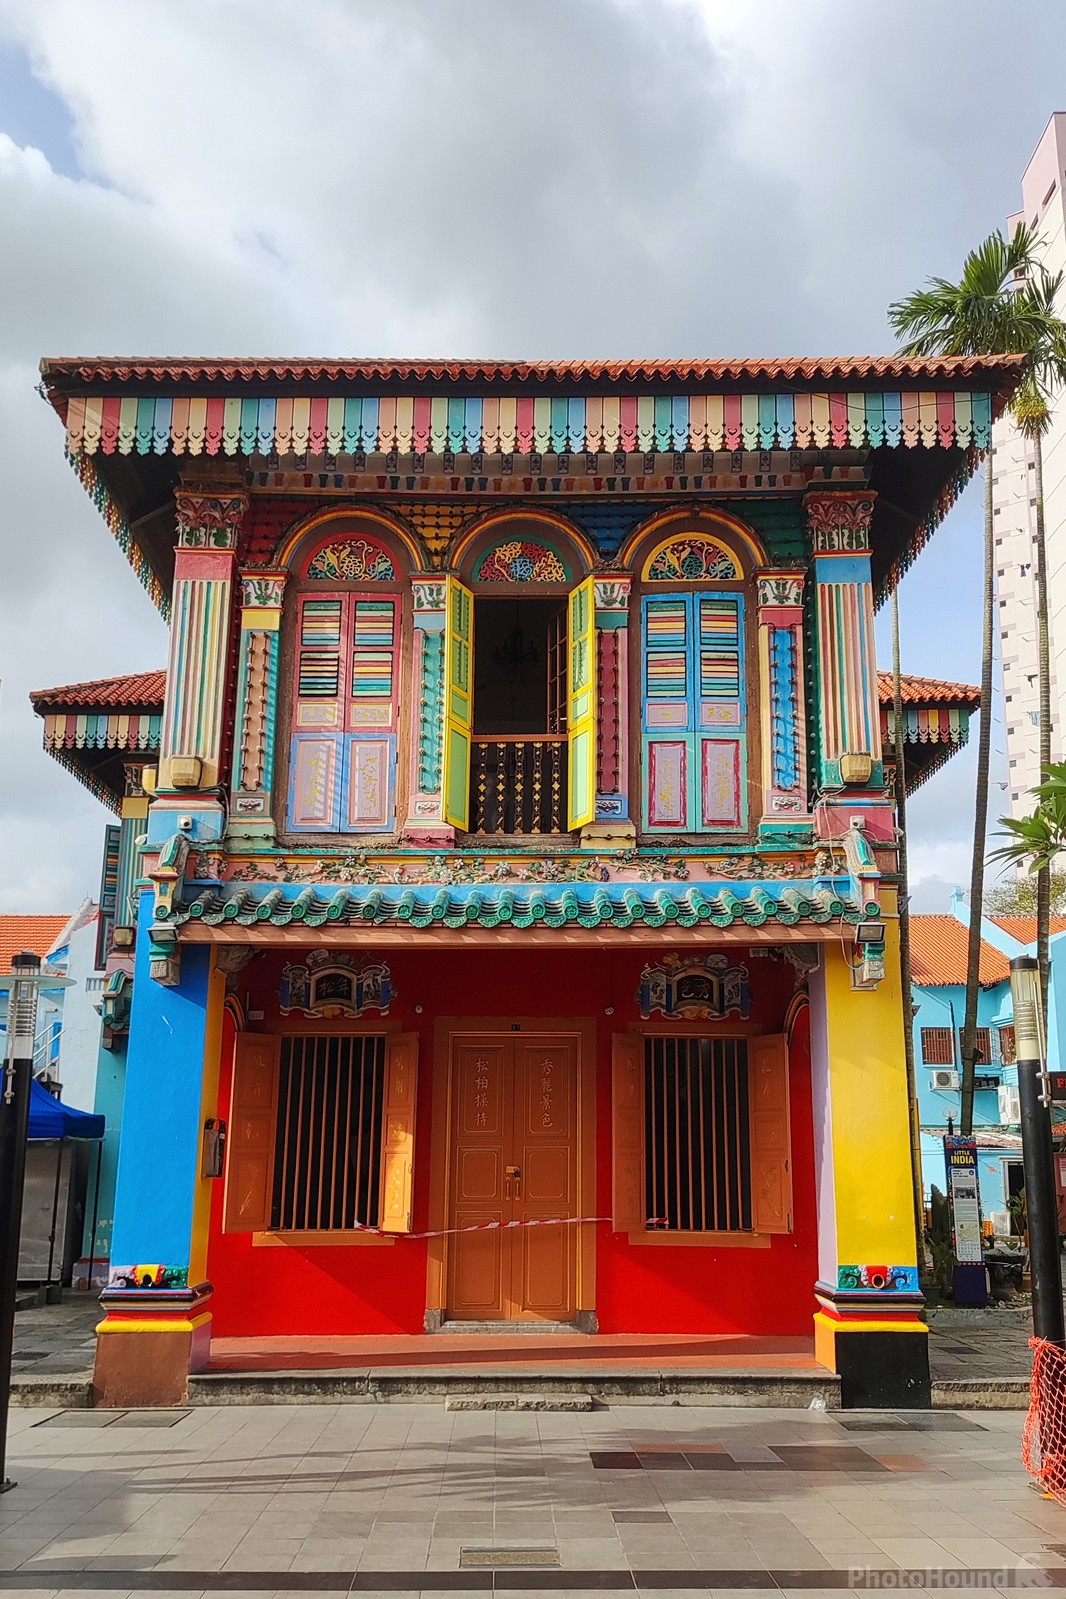 Image of House of Tan Teng Niah by Exxposures Photography